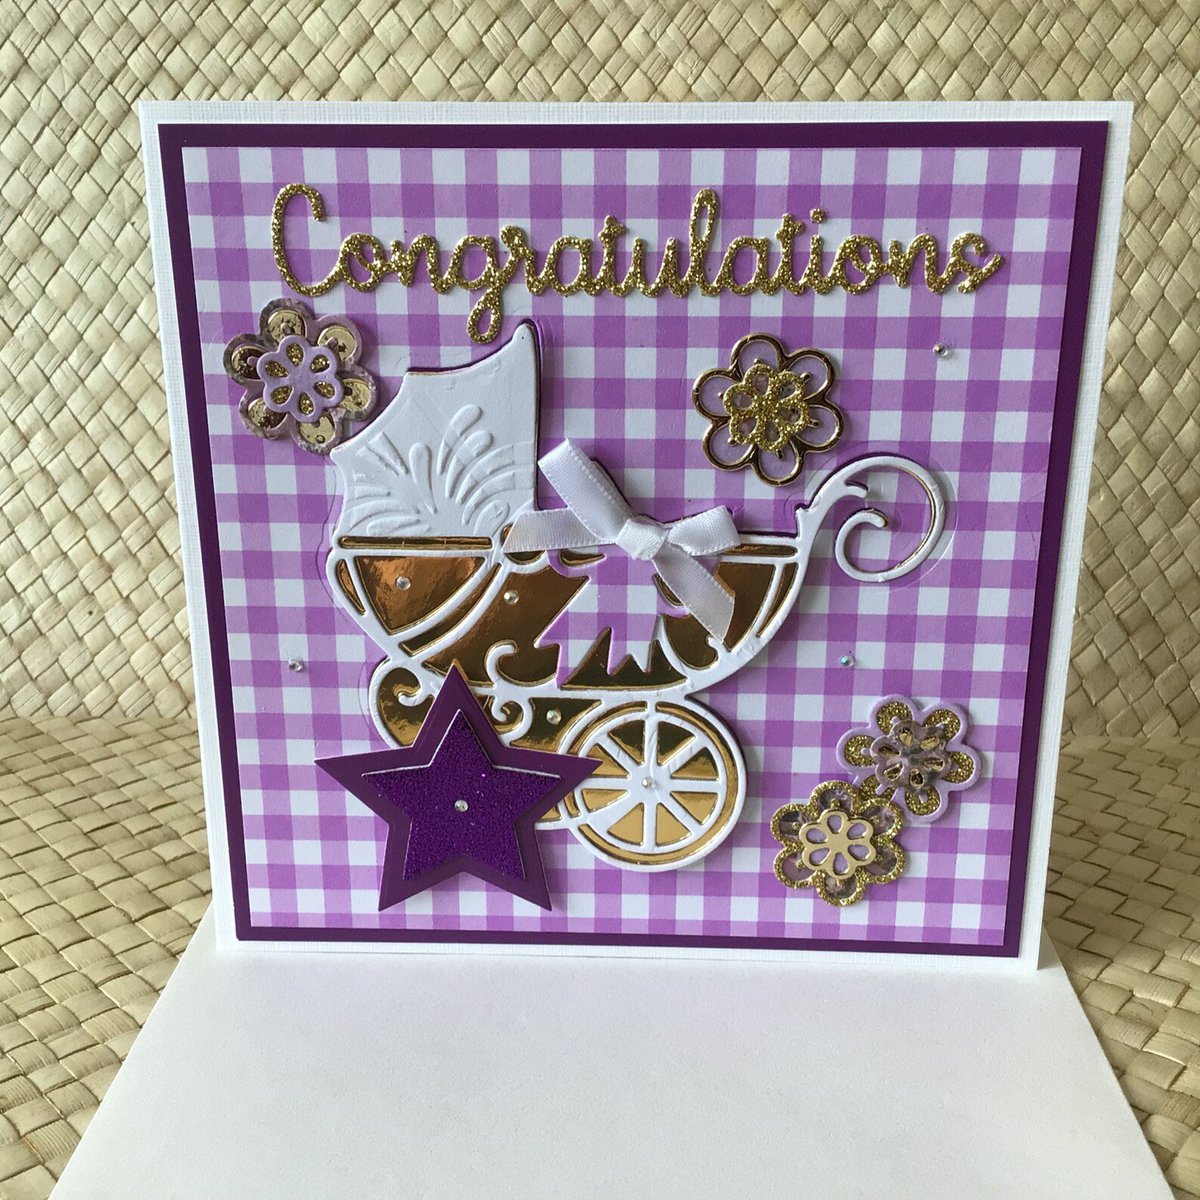 Unique handmade cards for new arrivals 👶
Baby Congratulations- New Arrival Design - Purple Gingham and Gold Carriage etsy.me/3JK61xa 

#bizhour #CraftBizParty #OOAK #newbaby #shopsmalluk